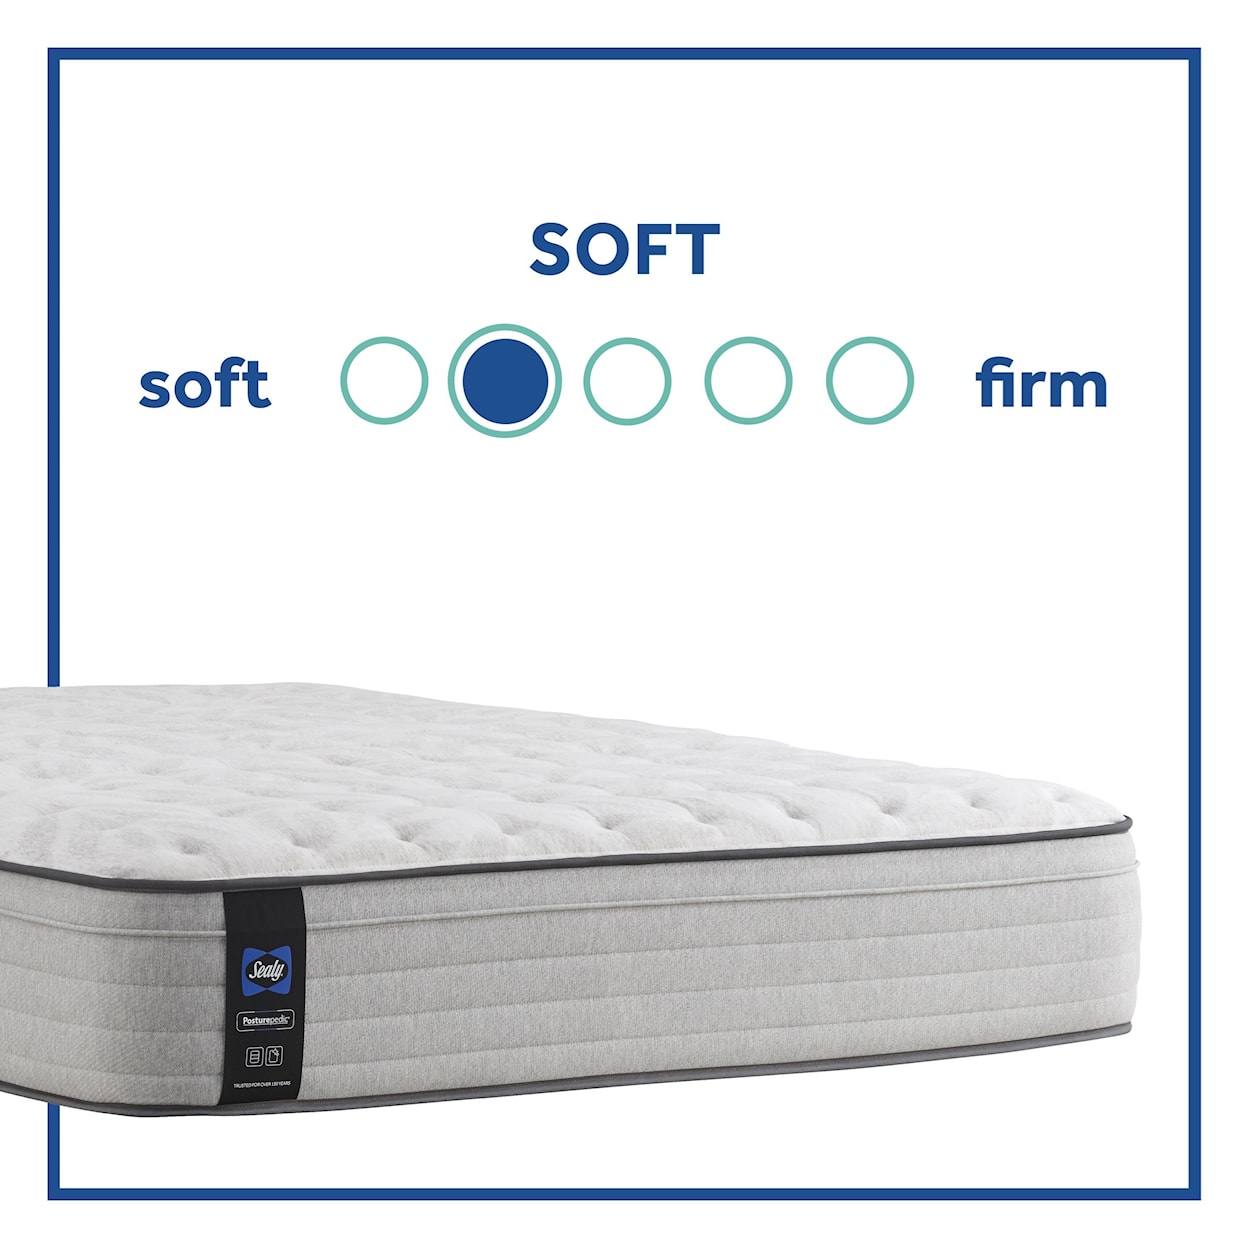 Sealy PPS3 Posturpedic Innerspring Soft FXET King 13" Soft Faux Euro Top Mattress Set